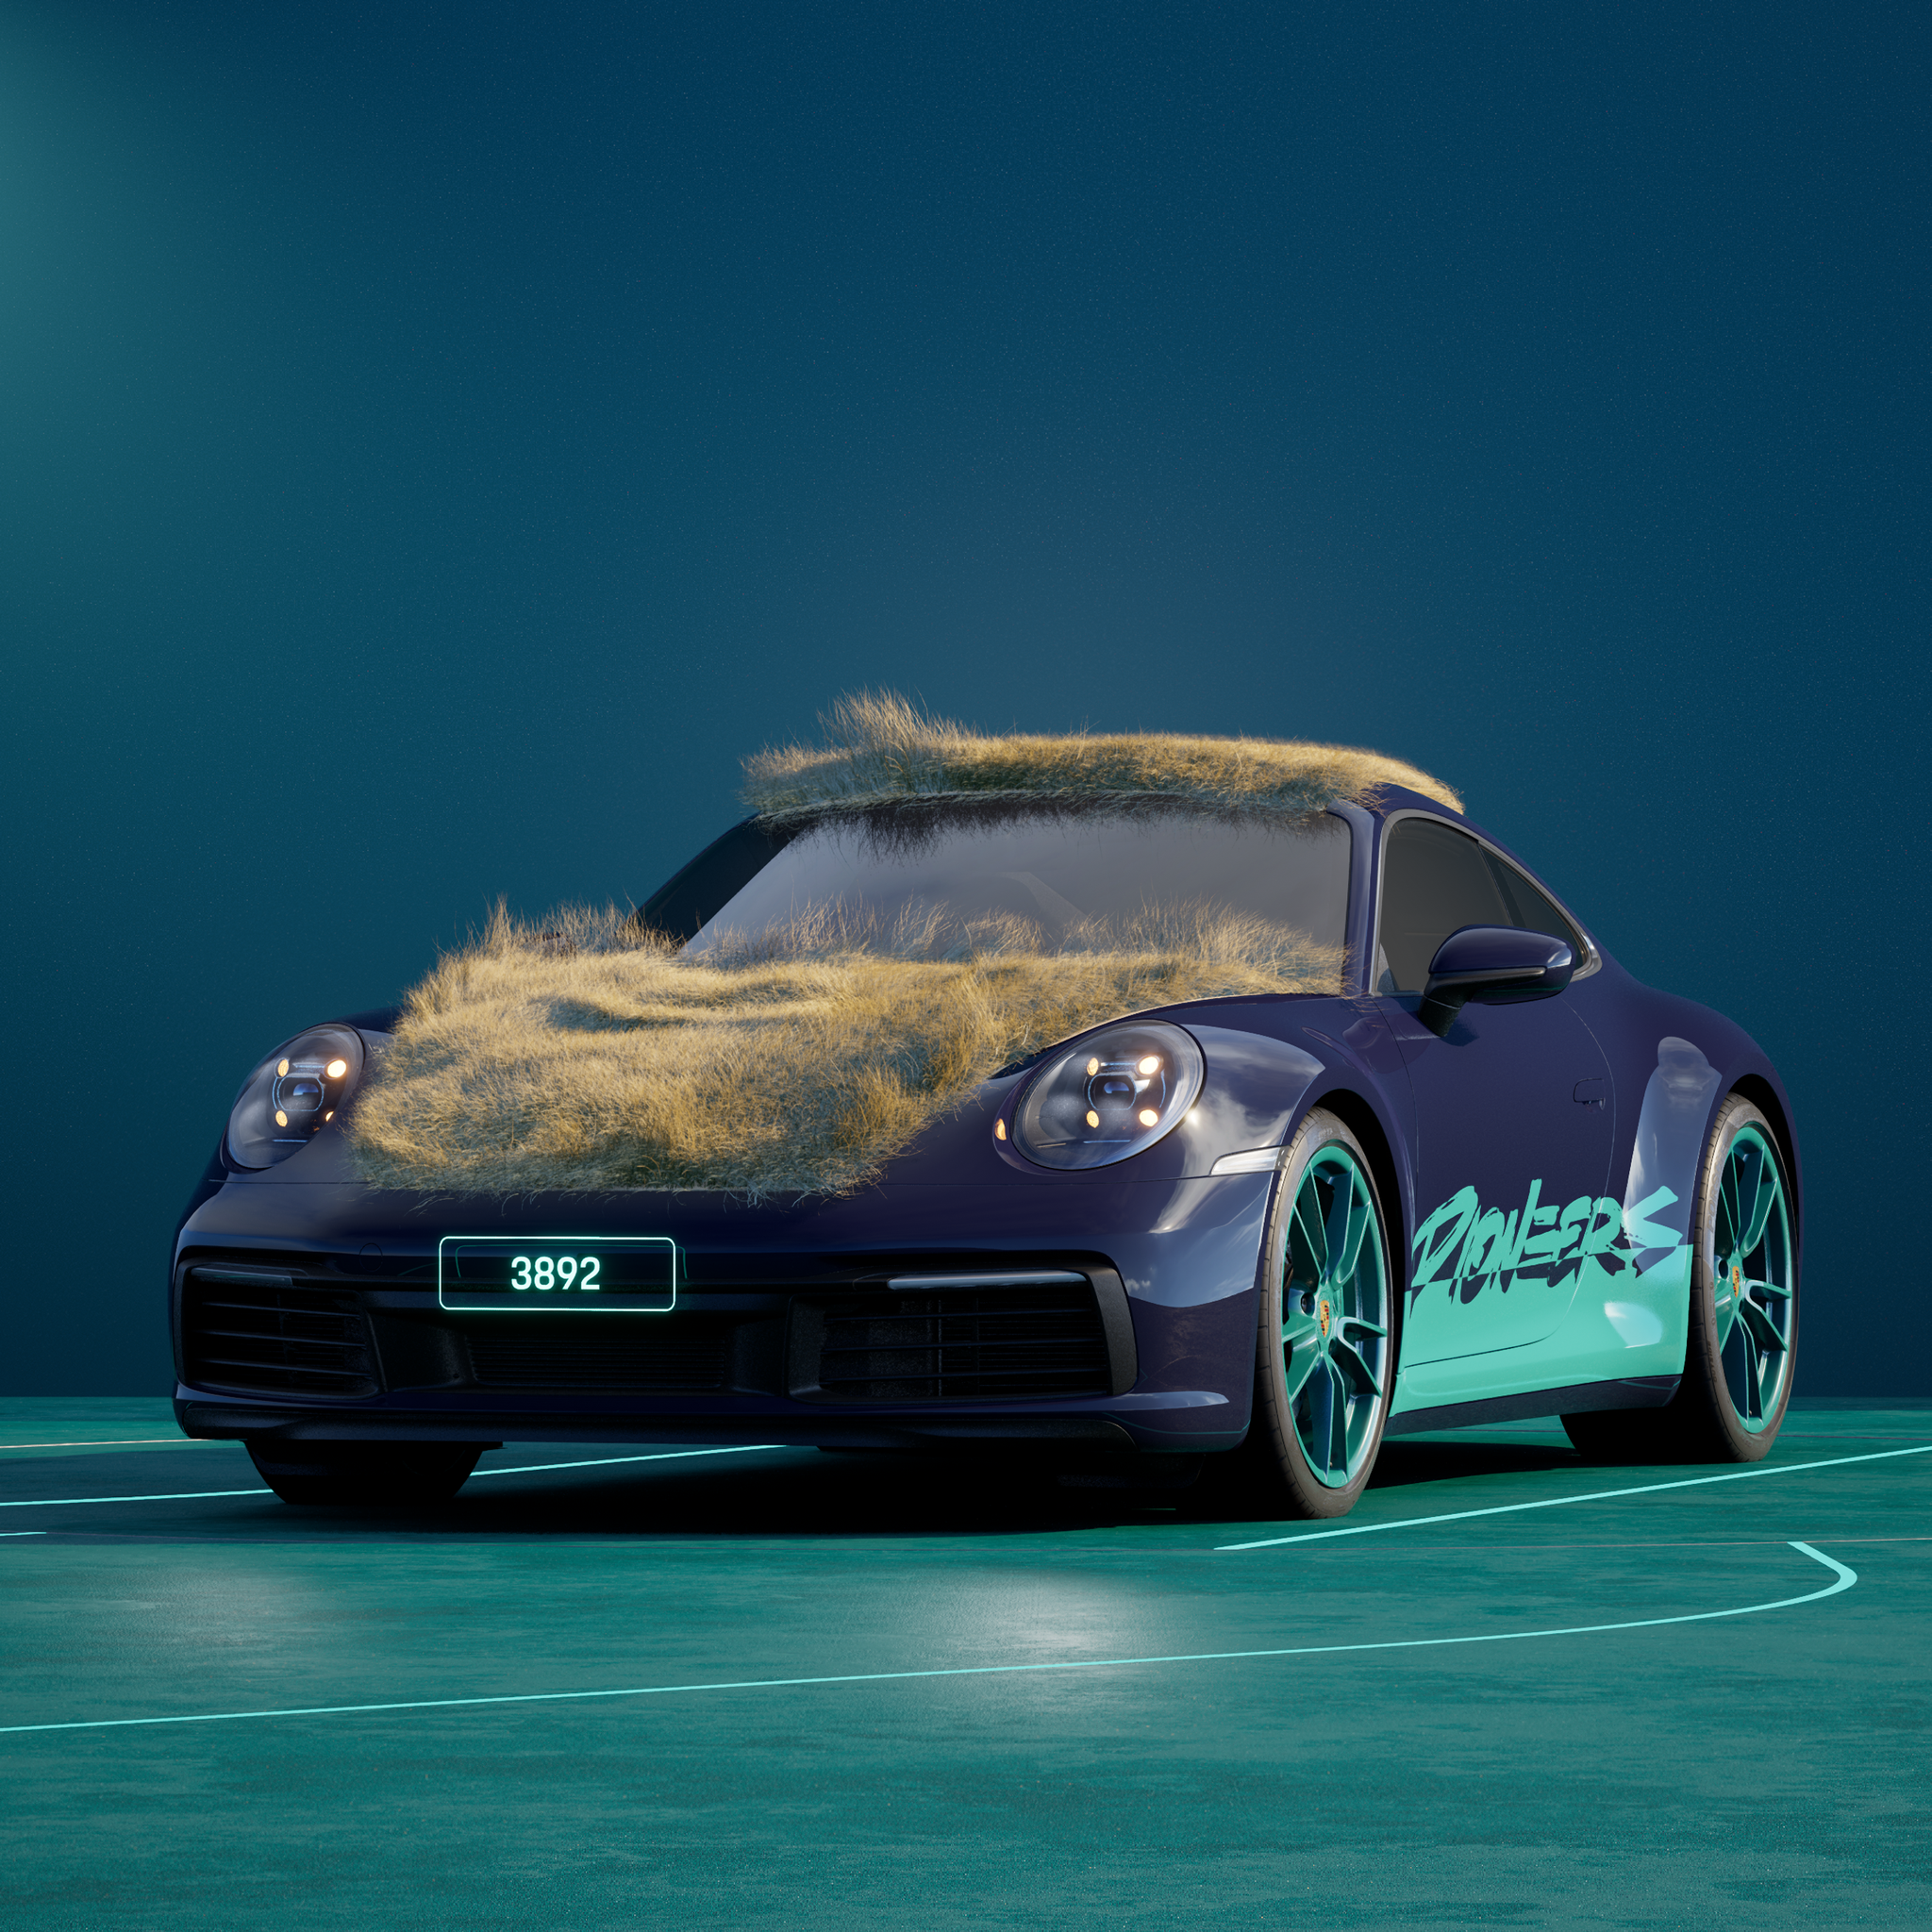 The PORSCHΞ 911 3892 image in phase